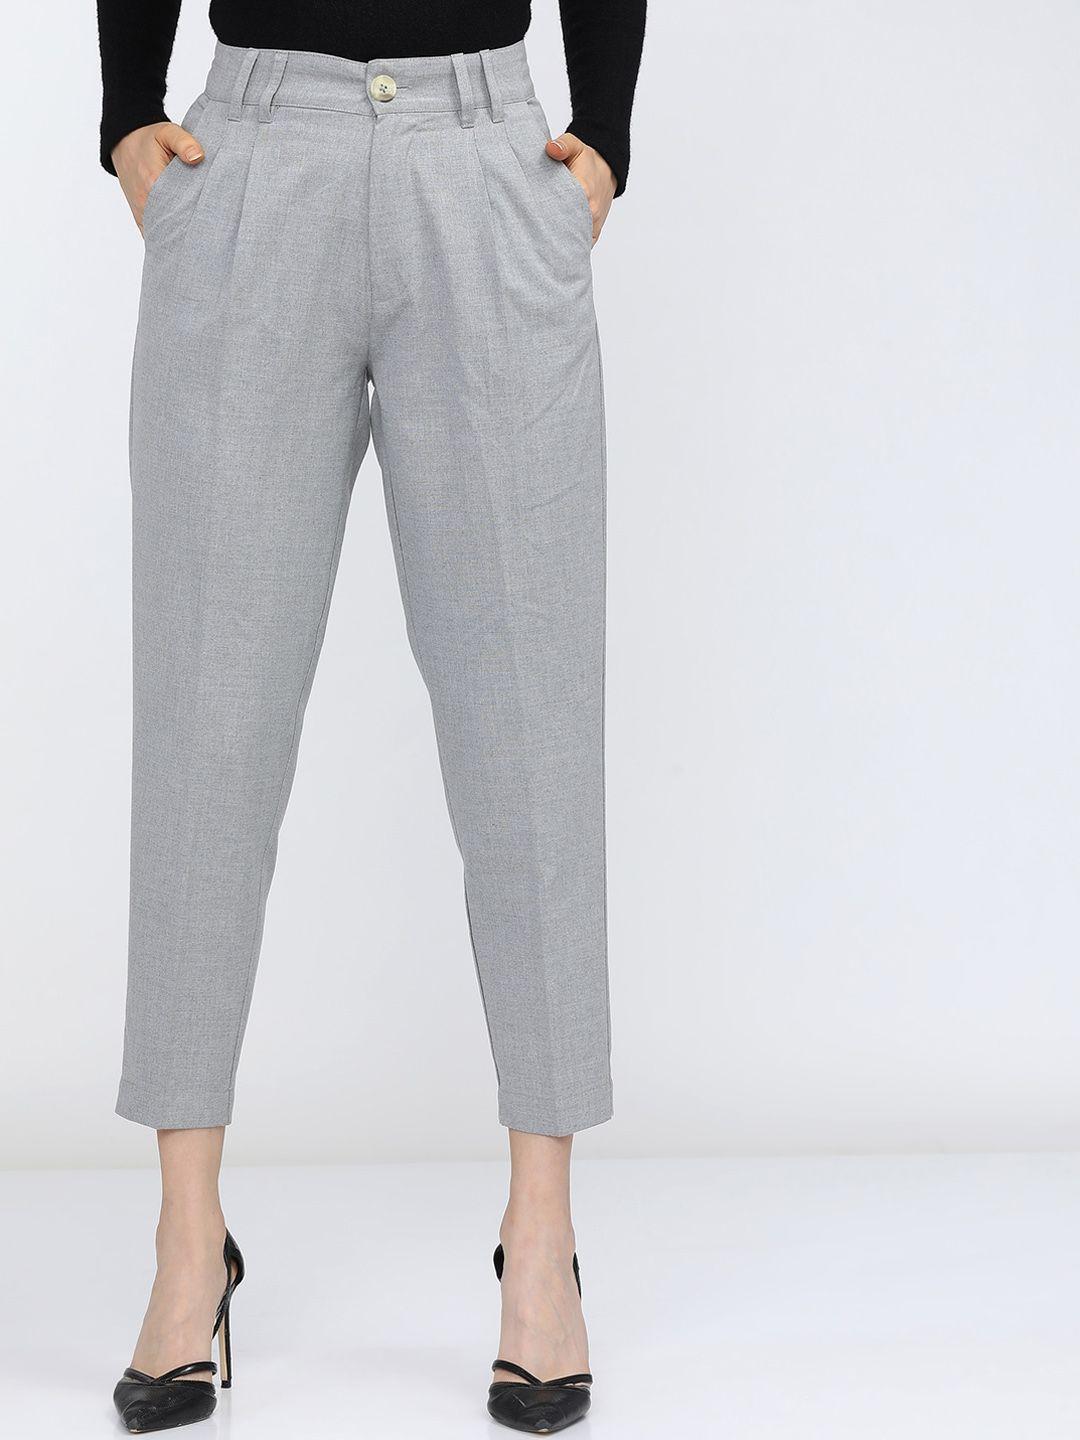 tokyo-talkies-women-grey-tapered-fit-pleated-trousers